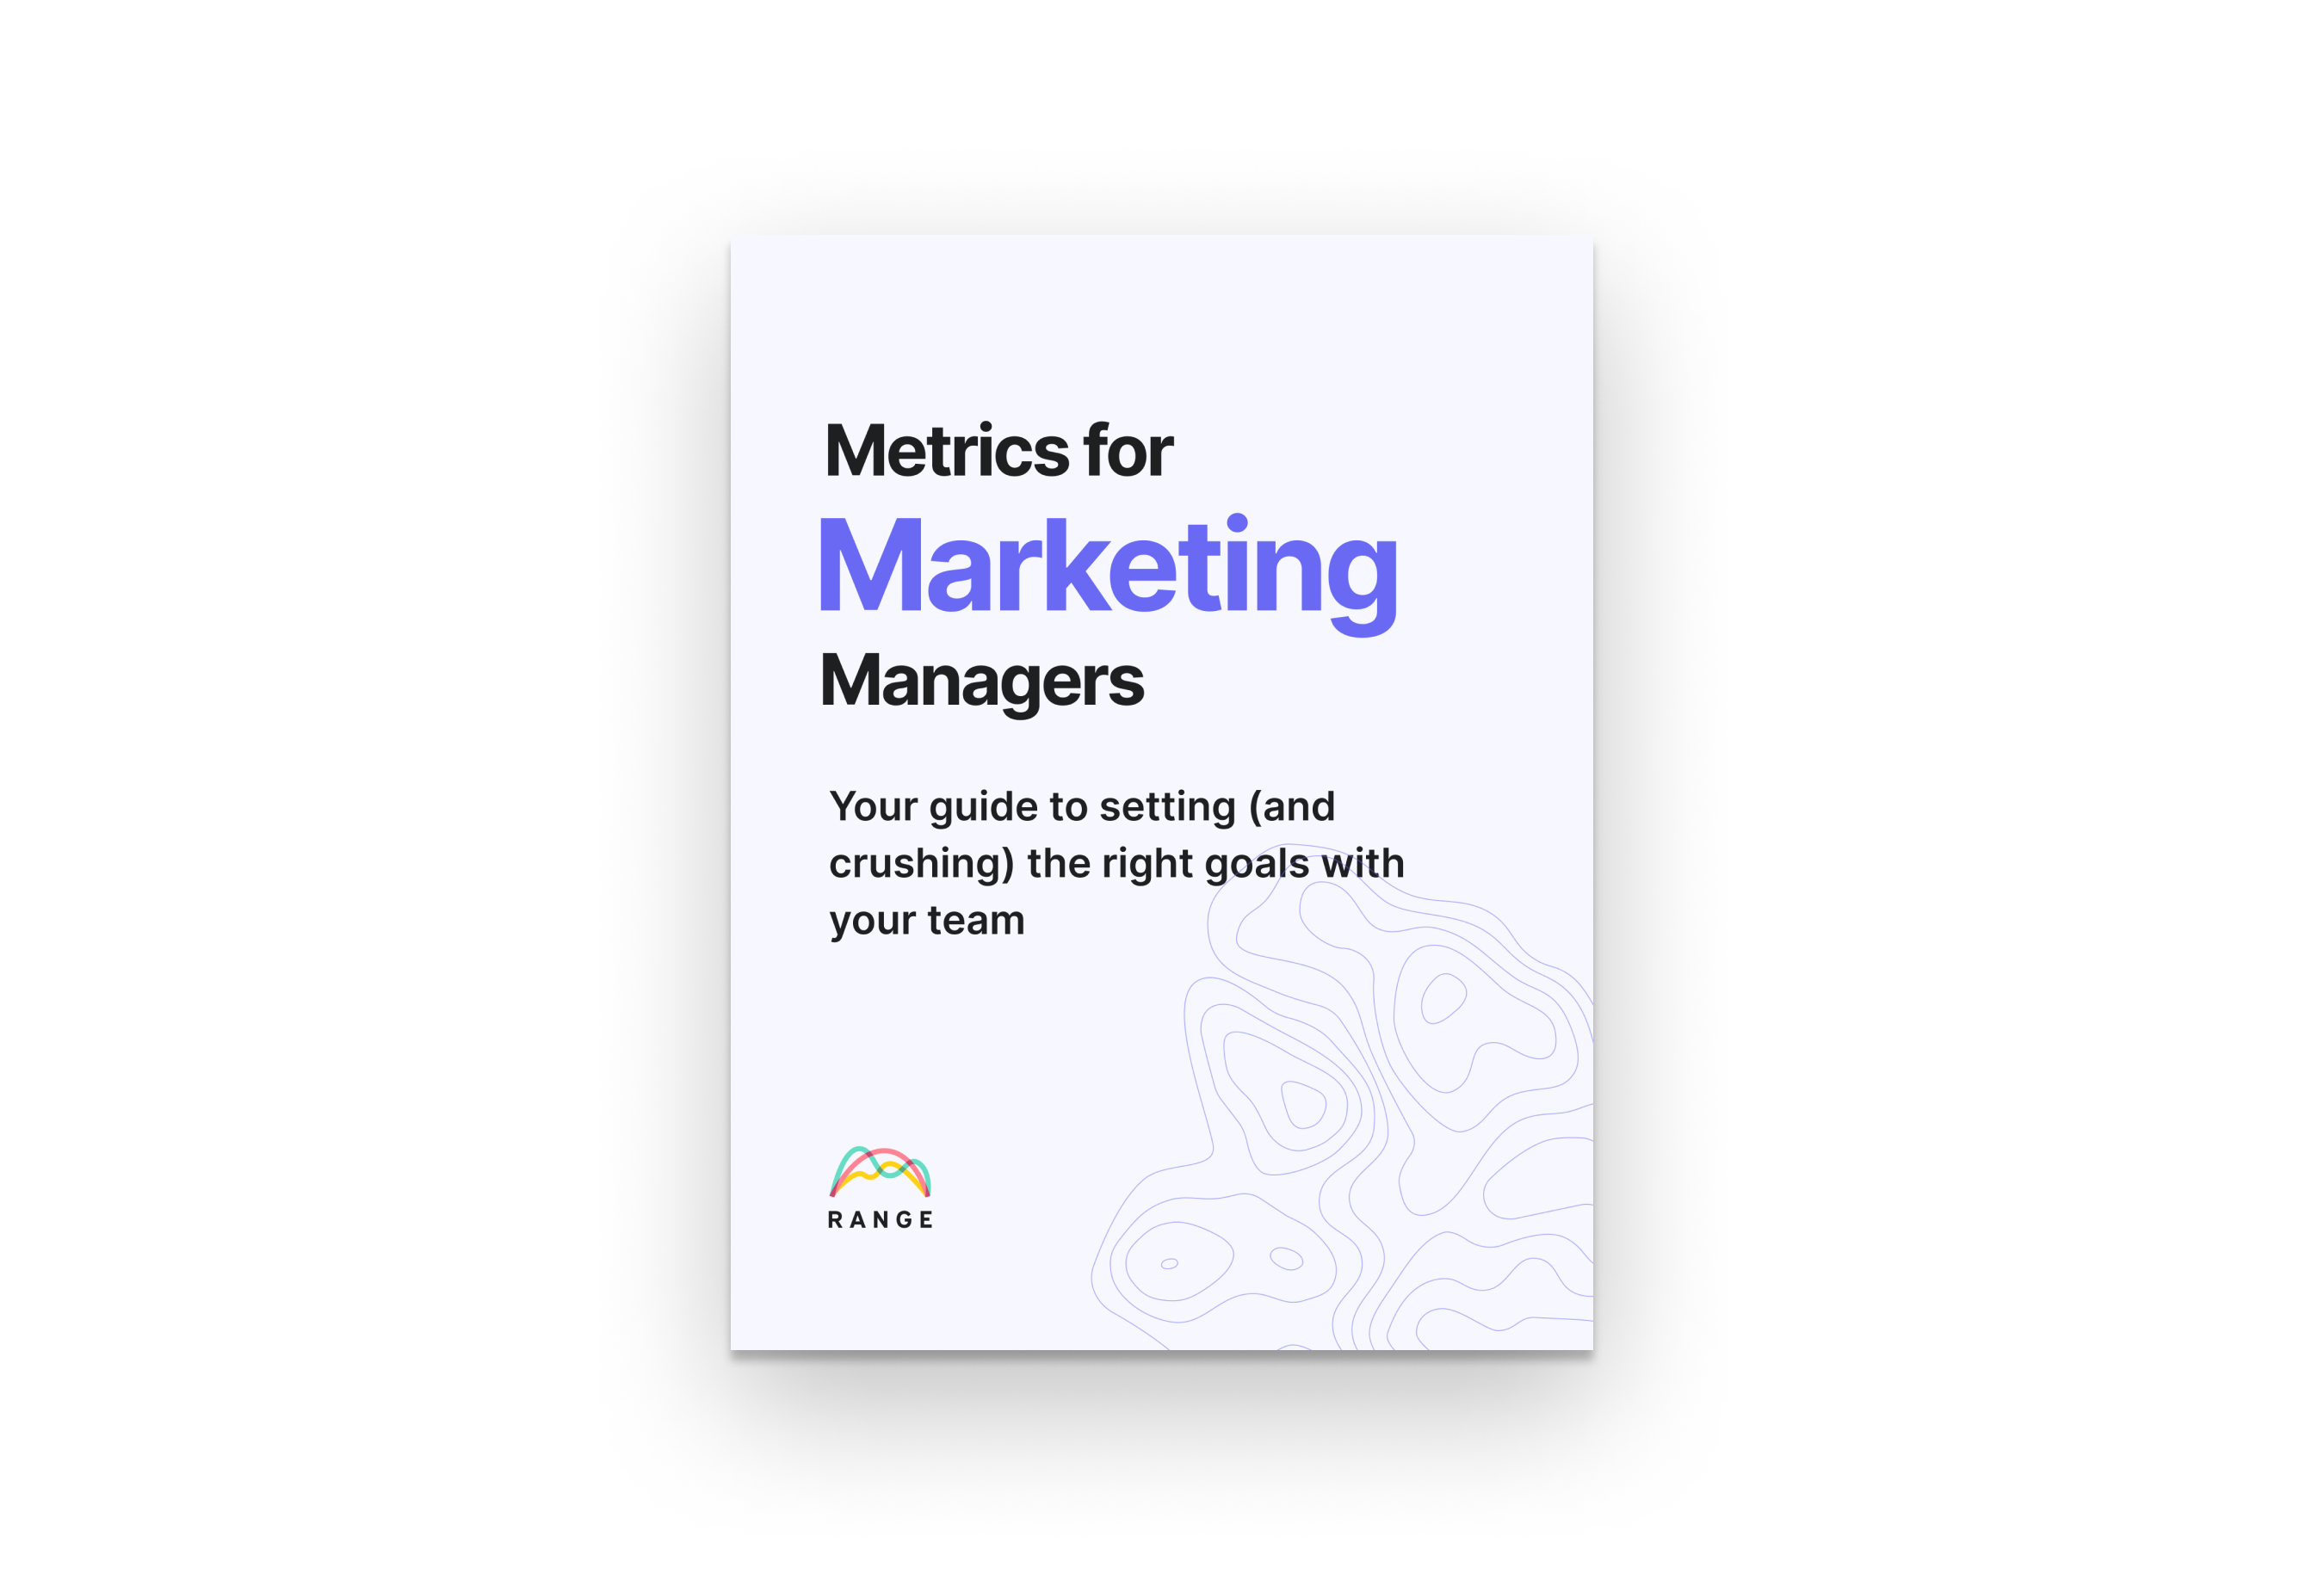 Download the Metrics for Marketing Managers Ebook